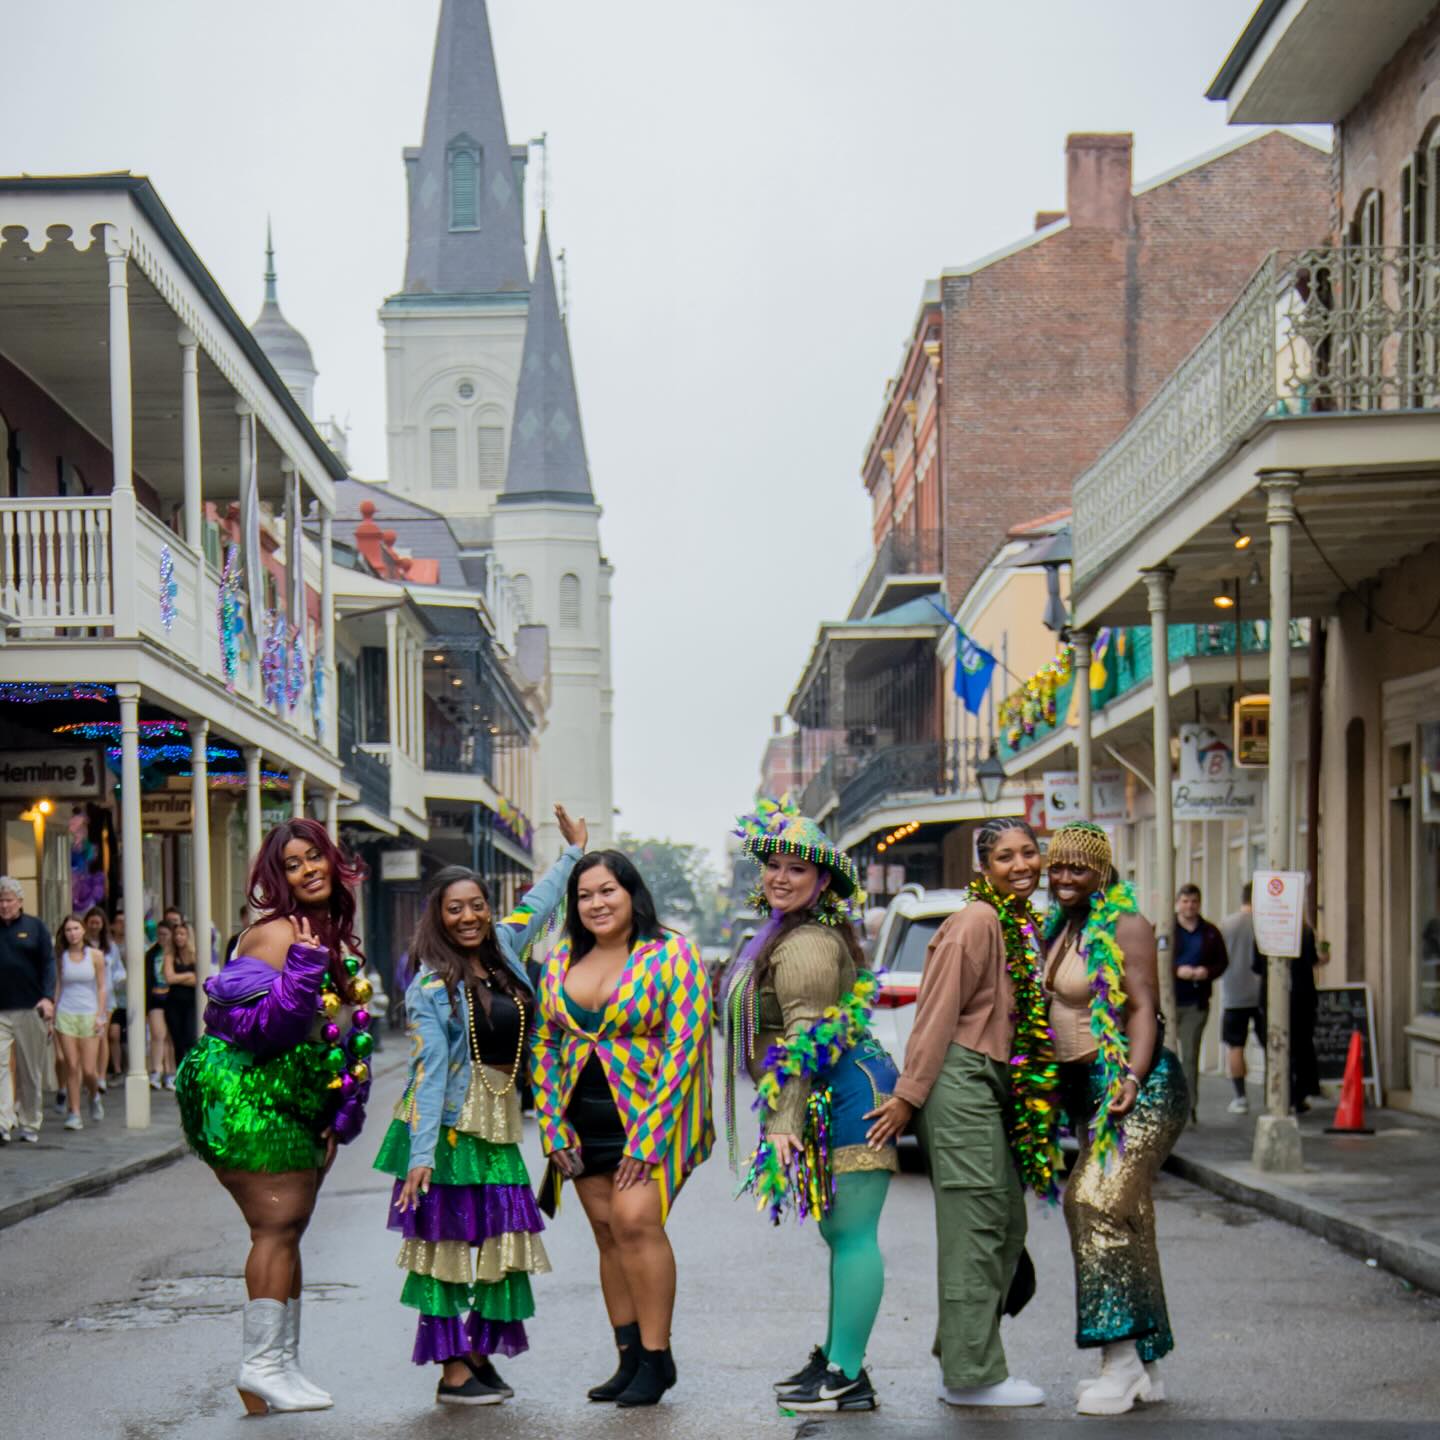 Festivals and Folklore: Mardi Gras and More